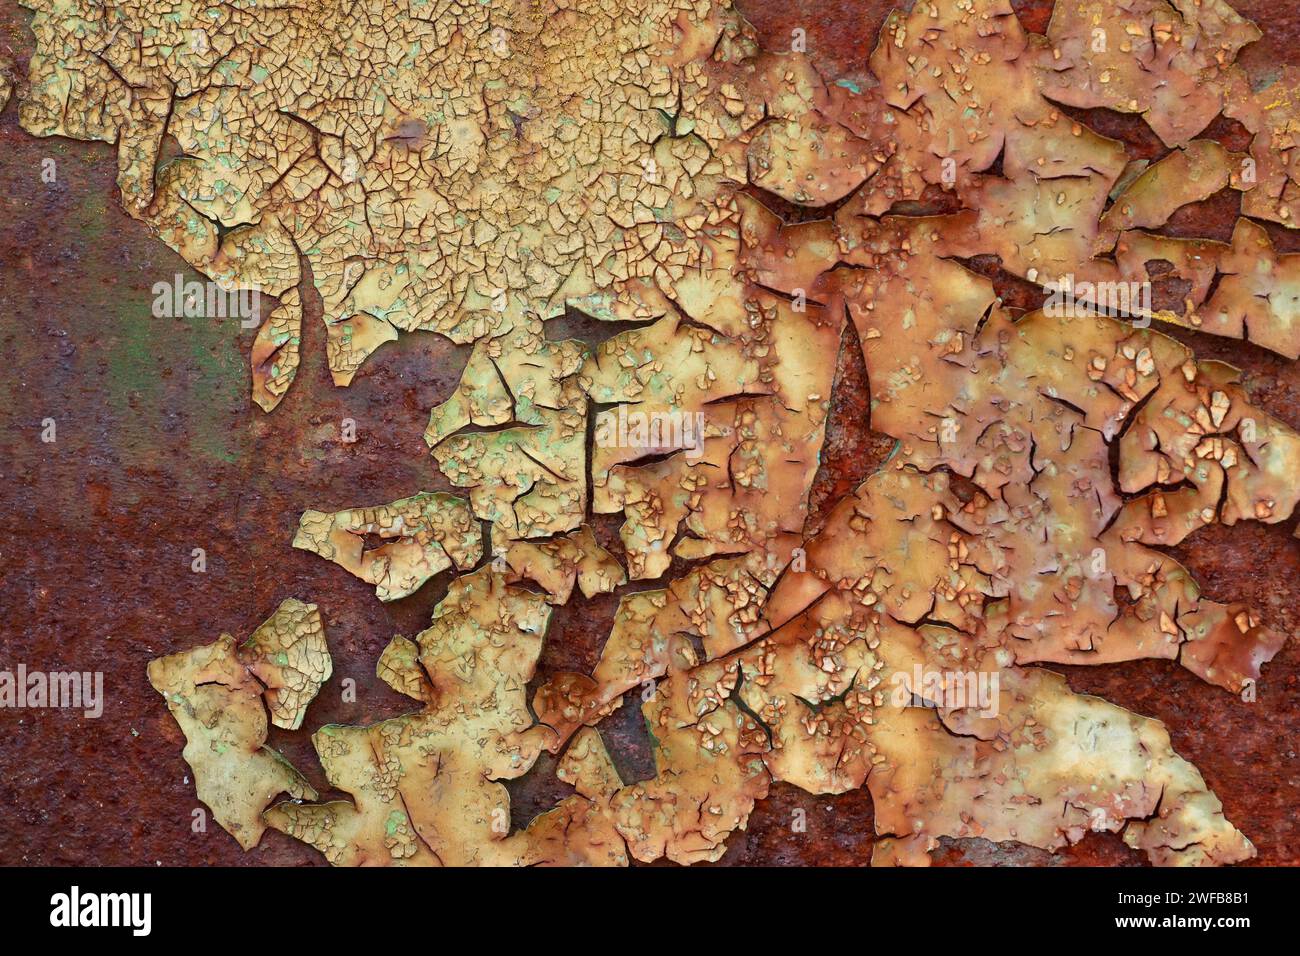 Flaking paint from the metal surface, grunge texture Stock Photo